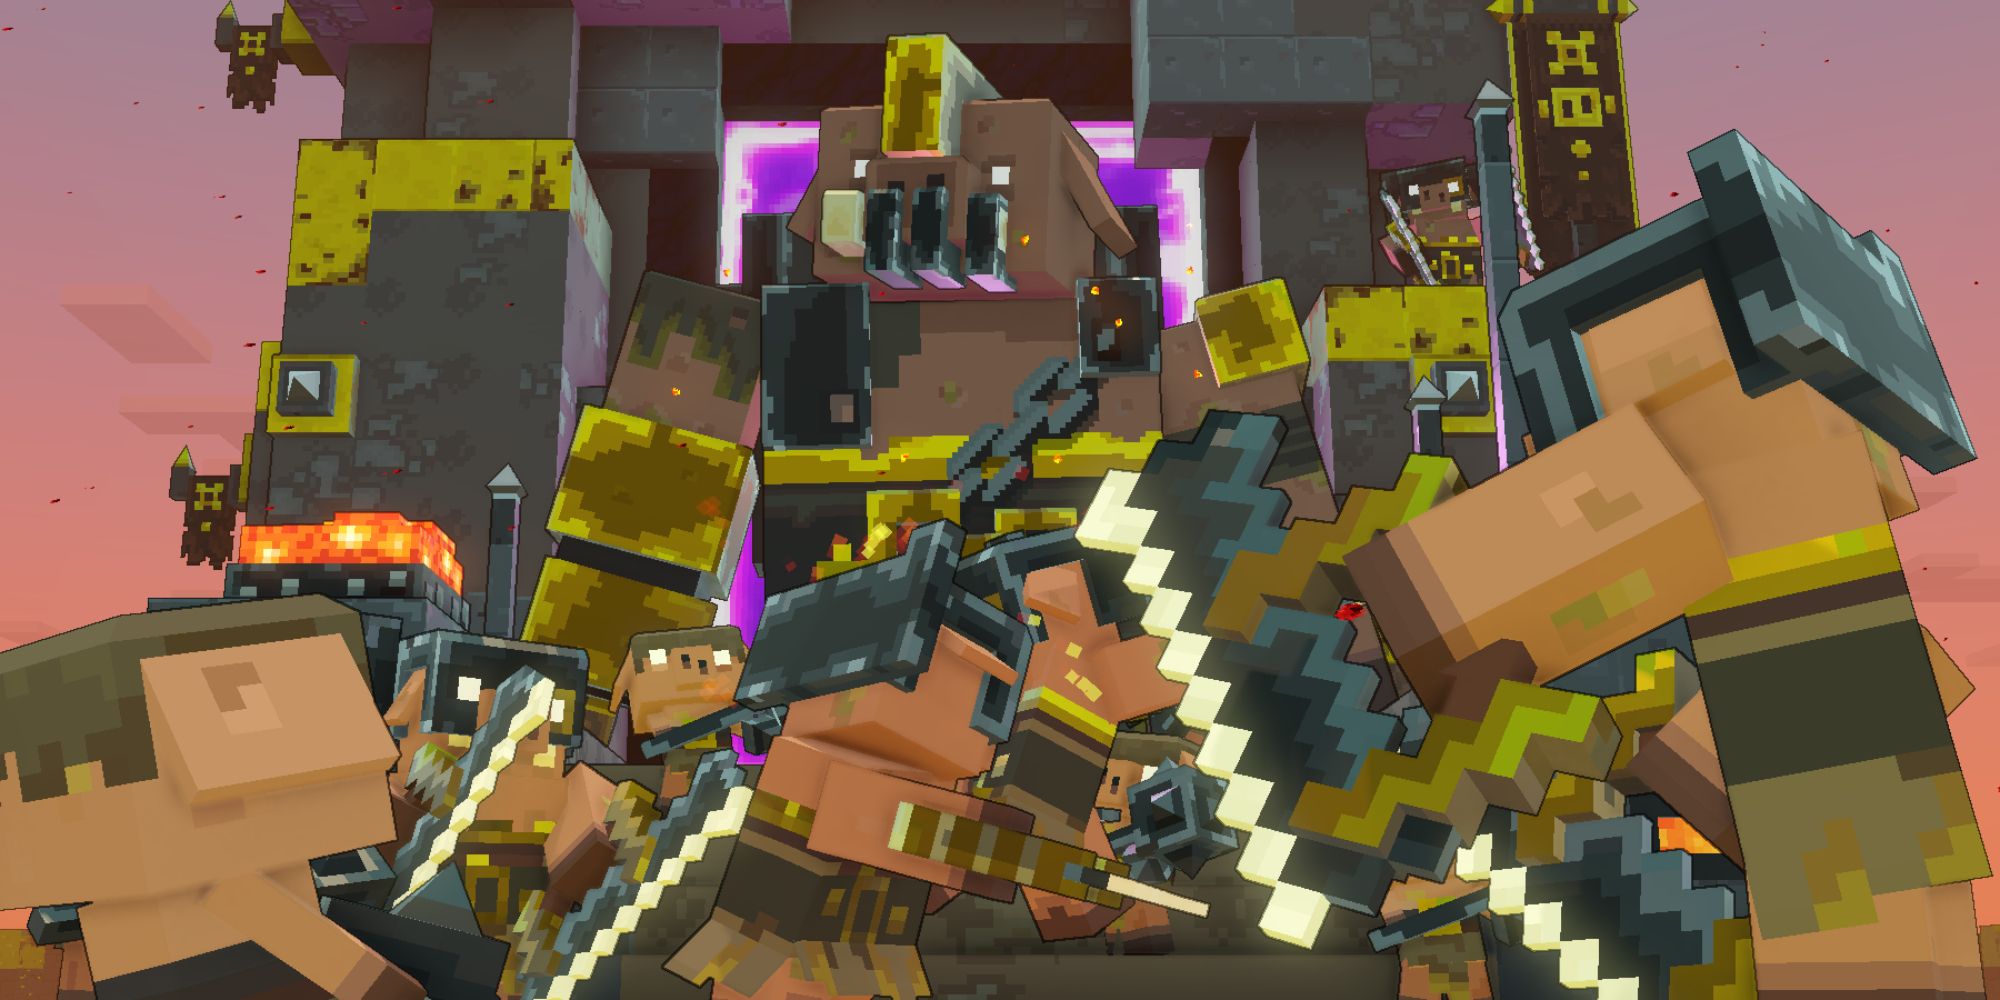 the unbreakable enters the overworld with an army of piglins in minecraft legends